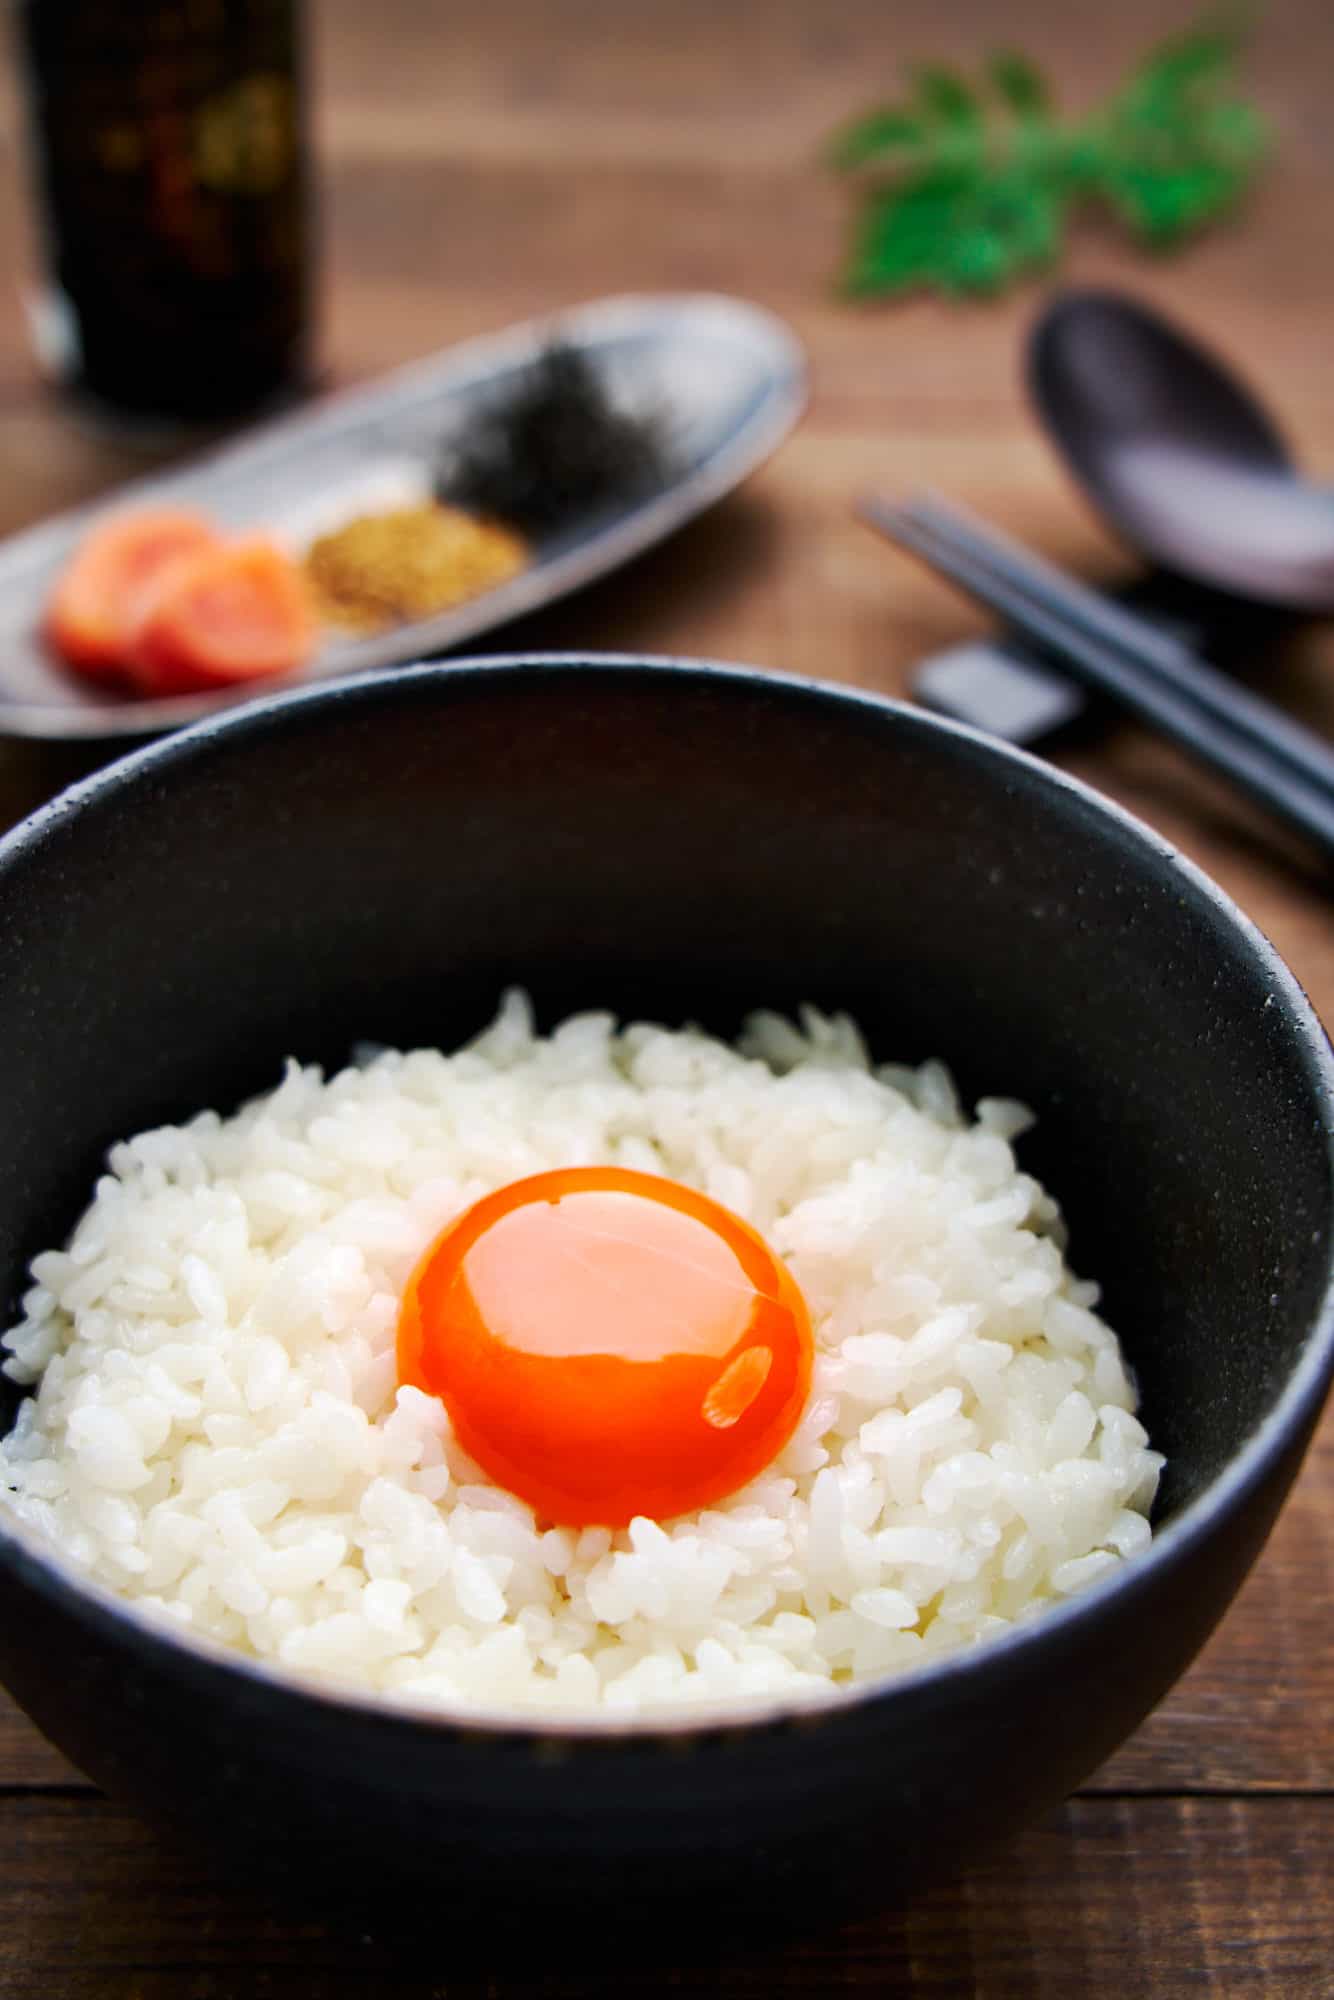 Tamago Kake Gohan is a popular Japanese breakfast food and this on features a vibrant orange egg yolk over a bed of piping hot rice